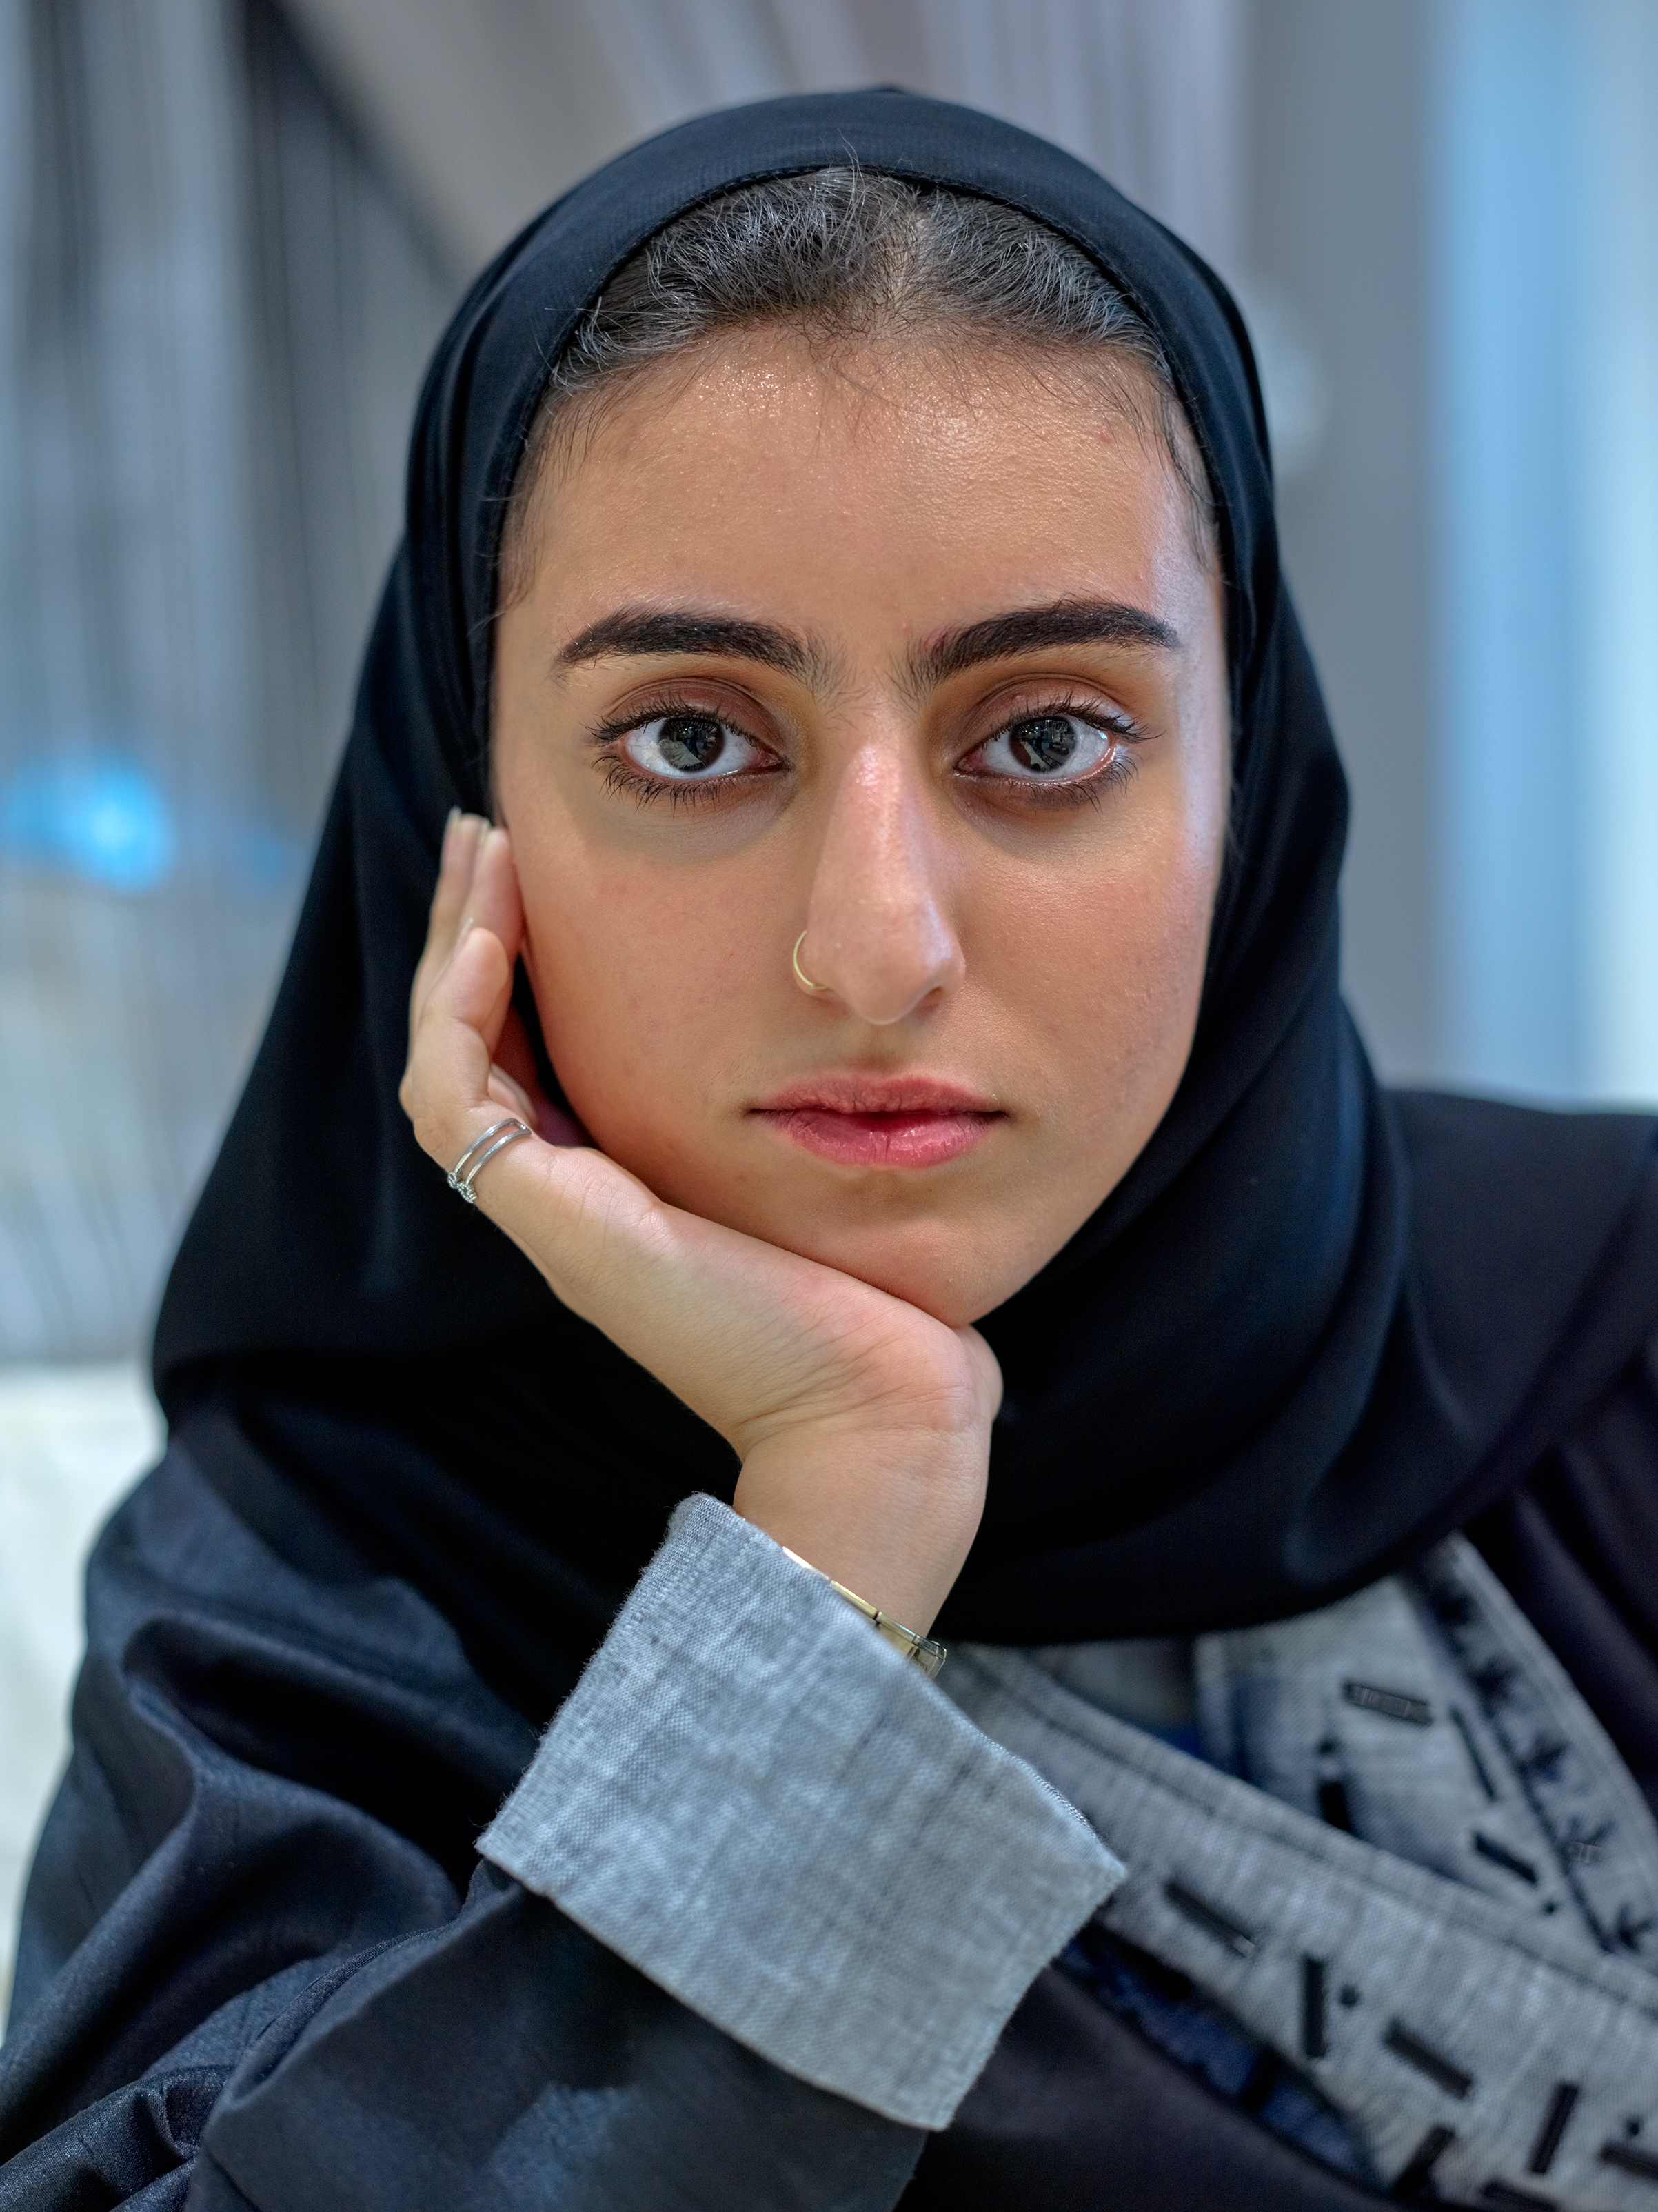 AlJohara, 18, is applying to study political science and wants to be a politician. She spoke plainly about life under MBS and expressed appreciation for what has been done for Saudi women over the past year. When it came to social media, she said, “These days you can’t arrest every woman who tweets. It is too many voices in one second.” (Ayesha Malik for TIME)